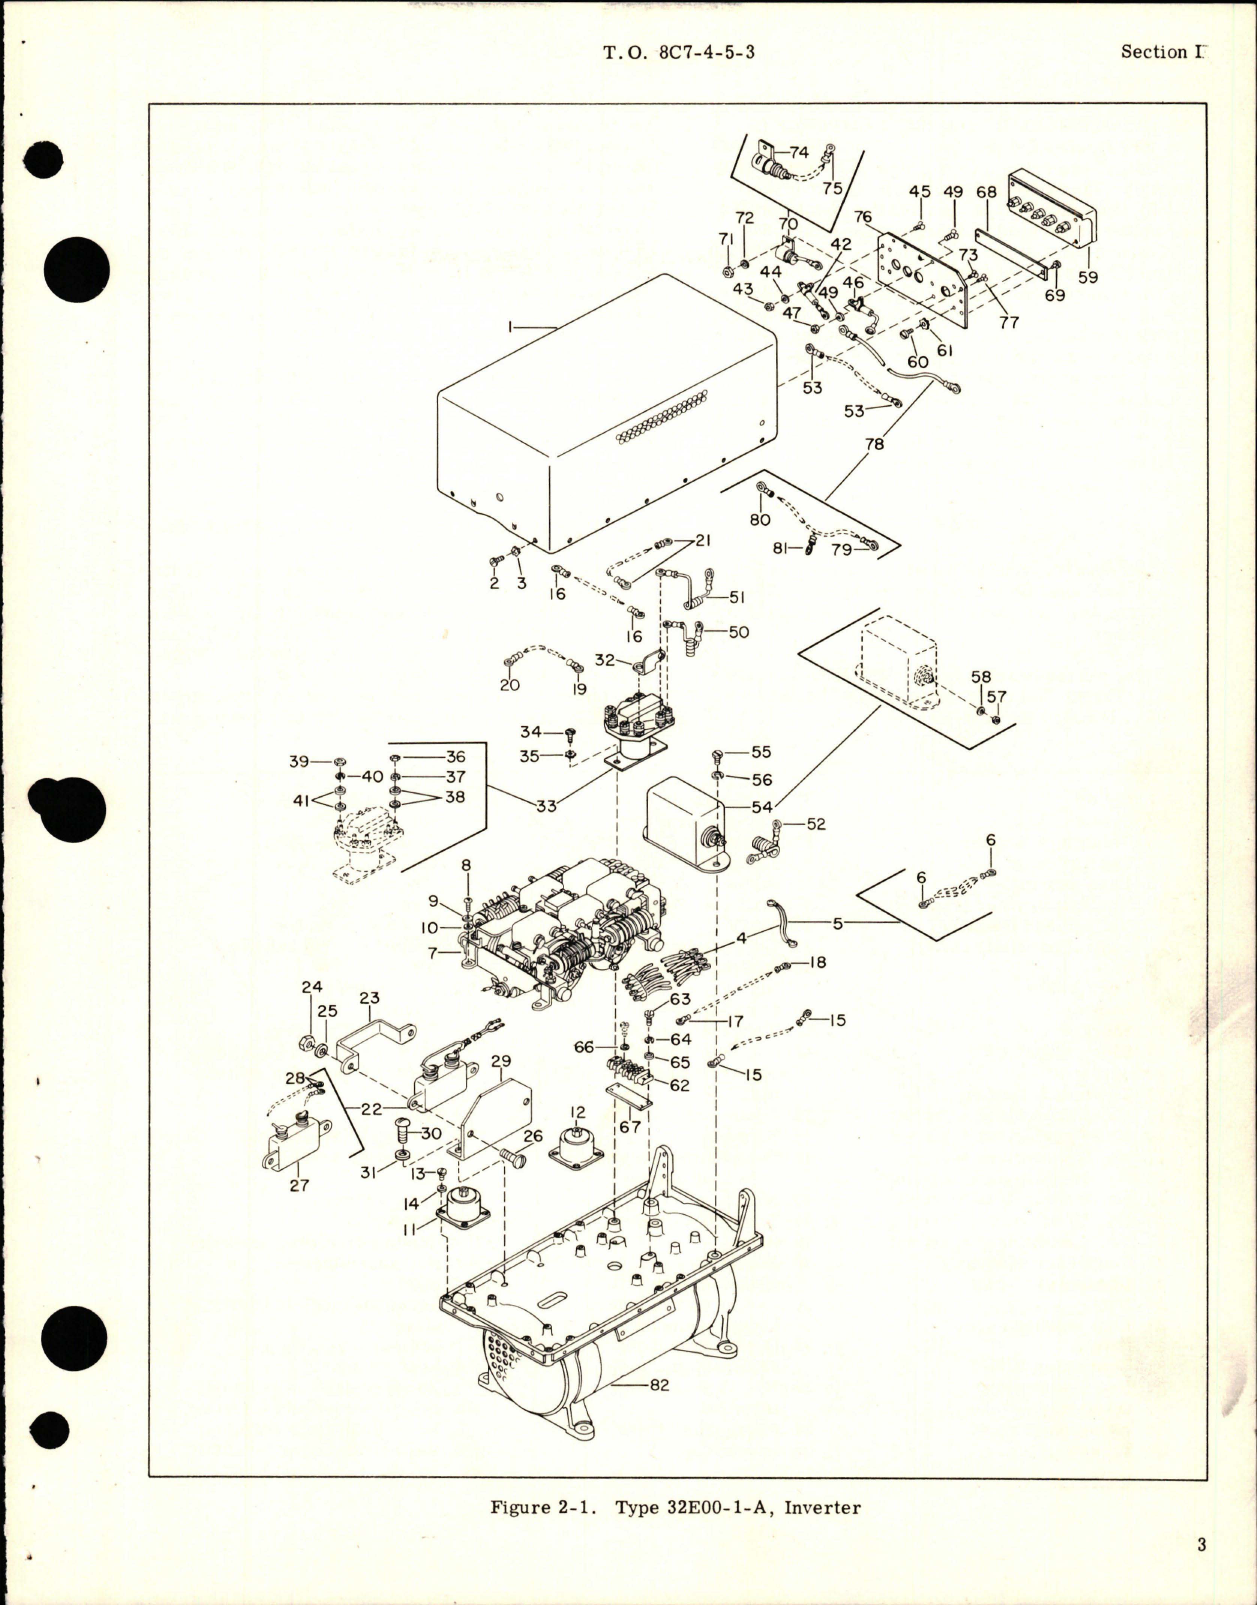 Sample page 7 from AirCorps Library document: Overhaul Instructions for Inverter - Type 32E00-1-A 